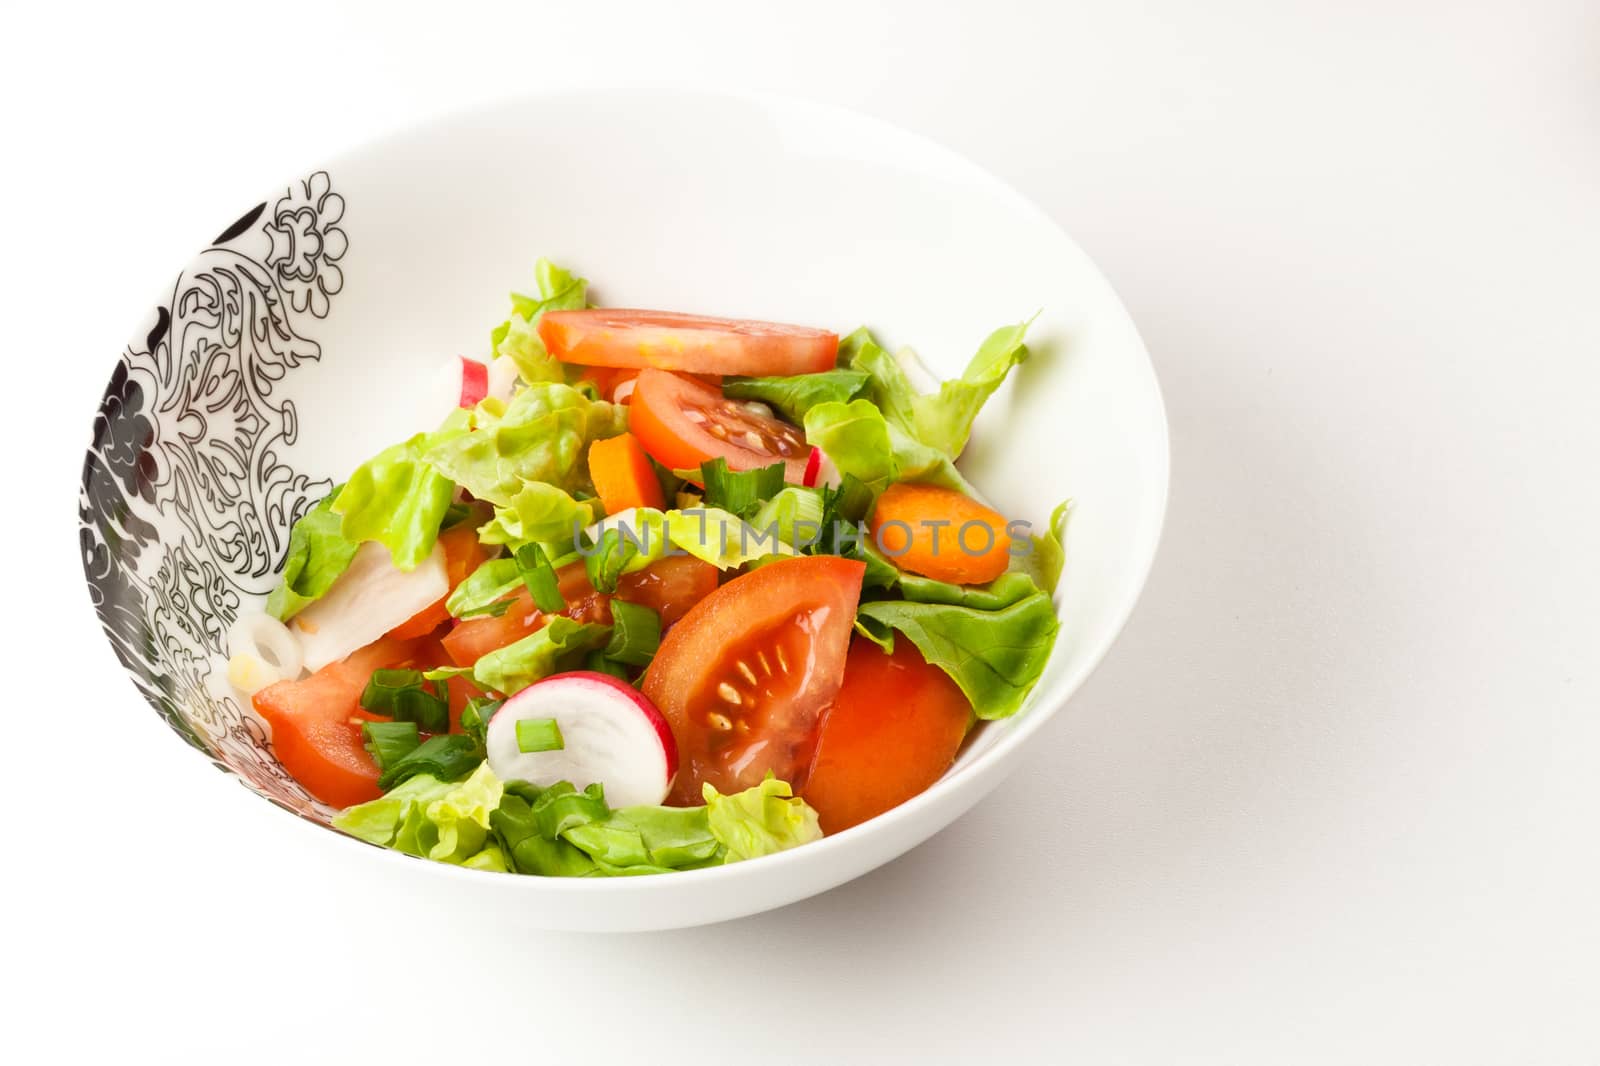 vegetable salad in a stylish black and white dish